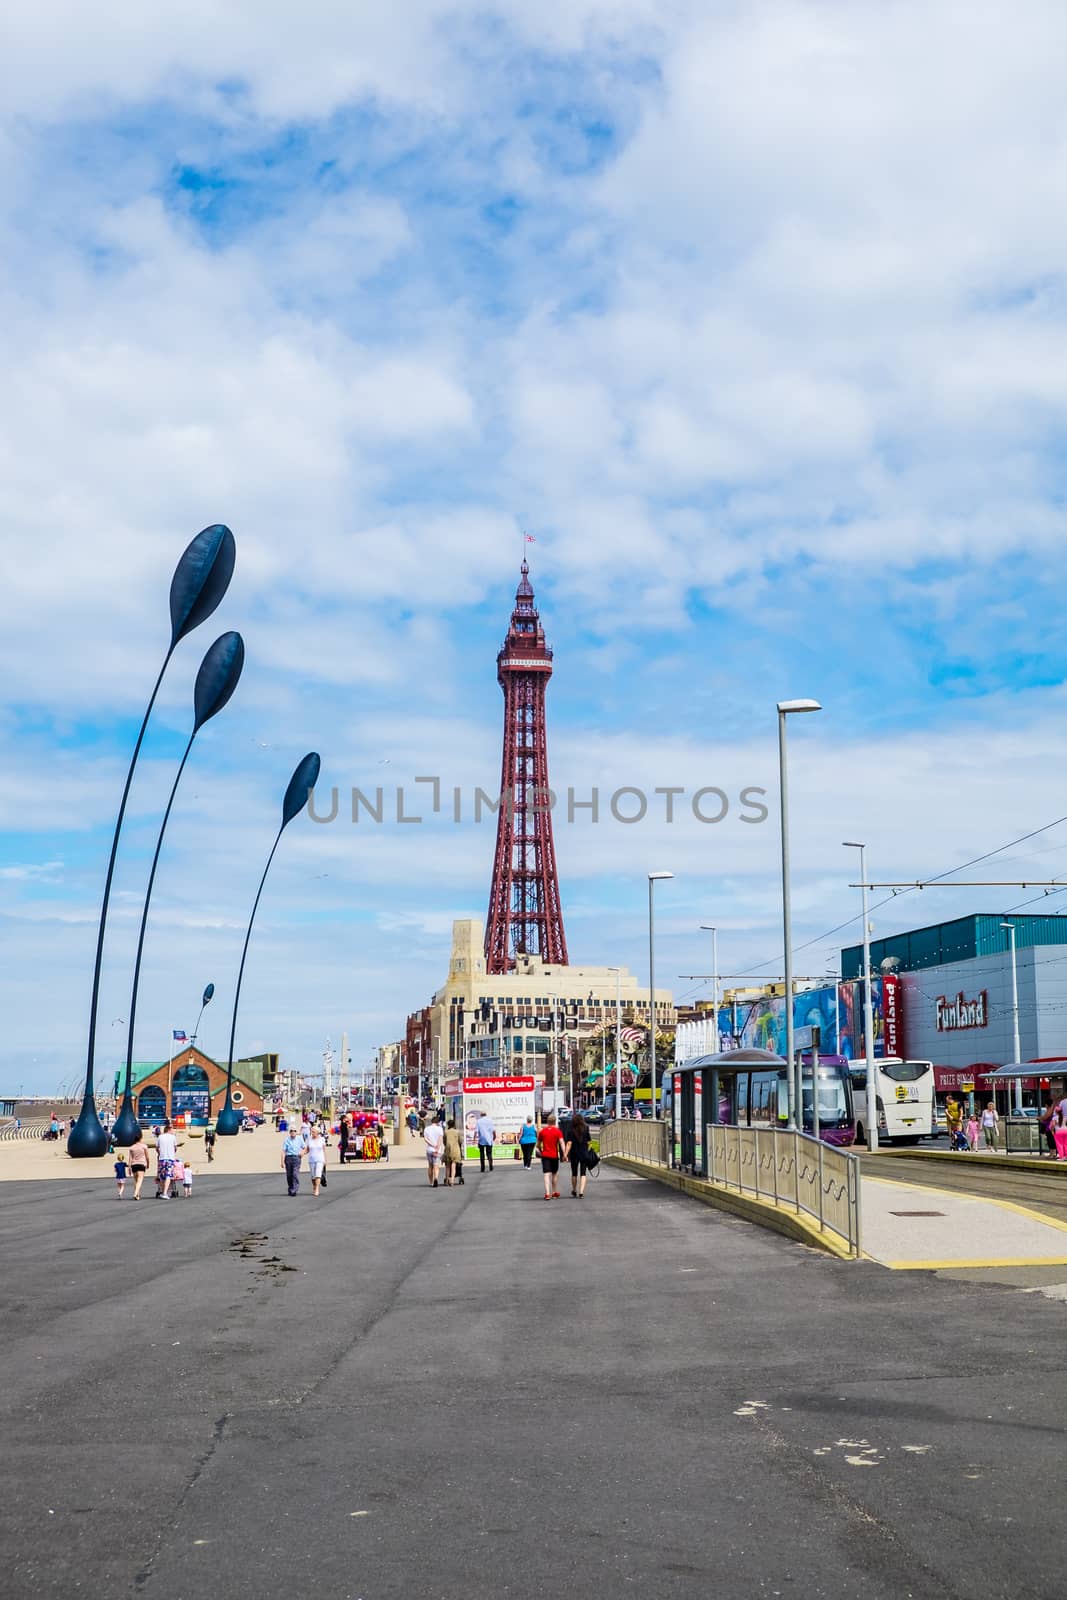 Promenade at Blackpool with the tower in the background